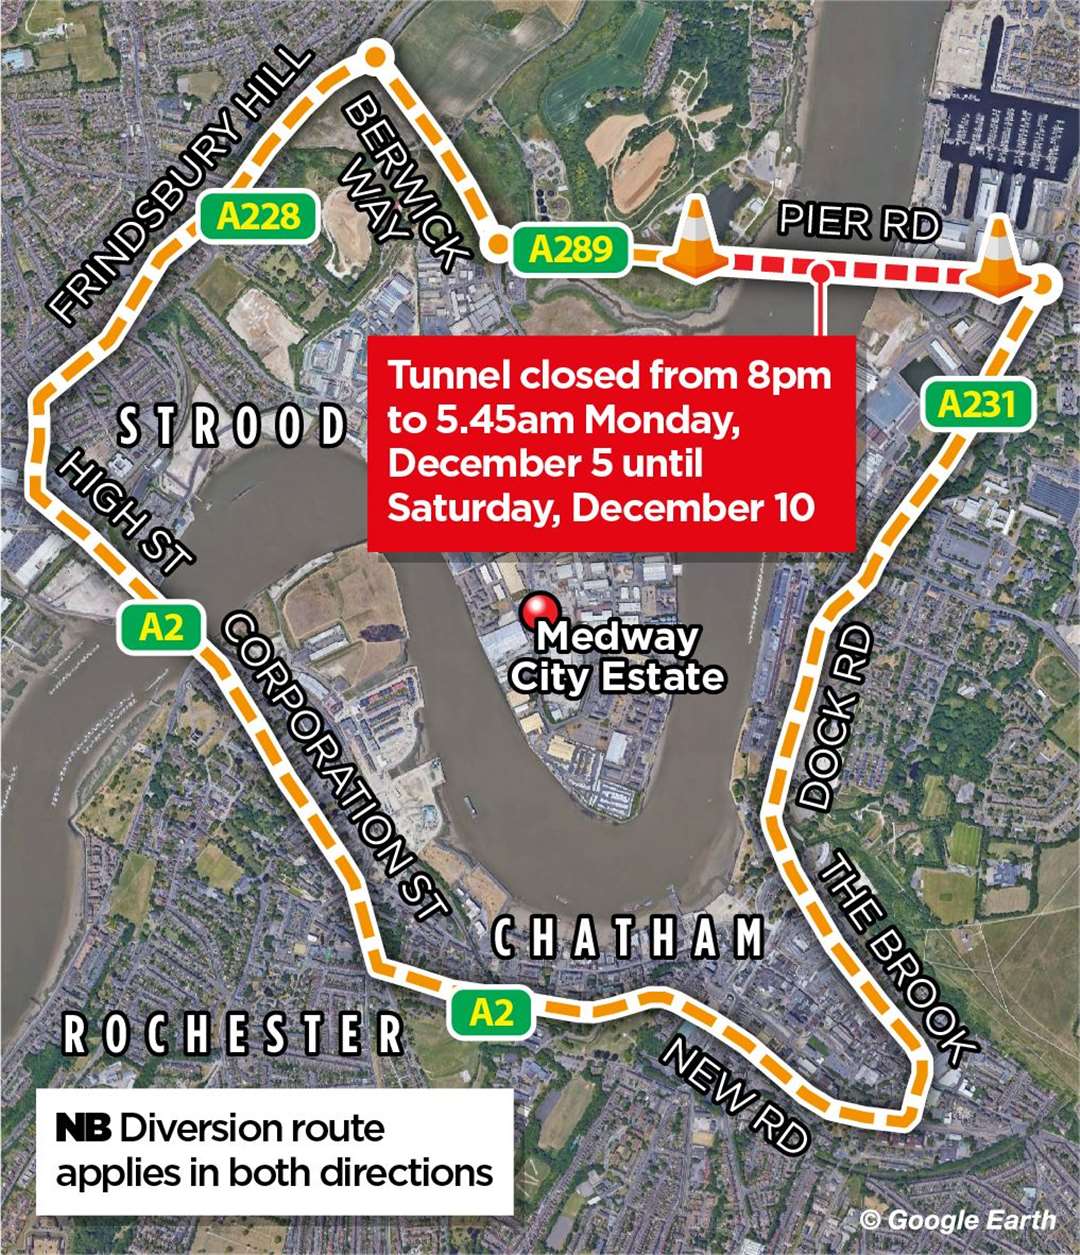 The diversion route while the tunnel is closed overnight